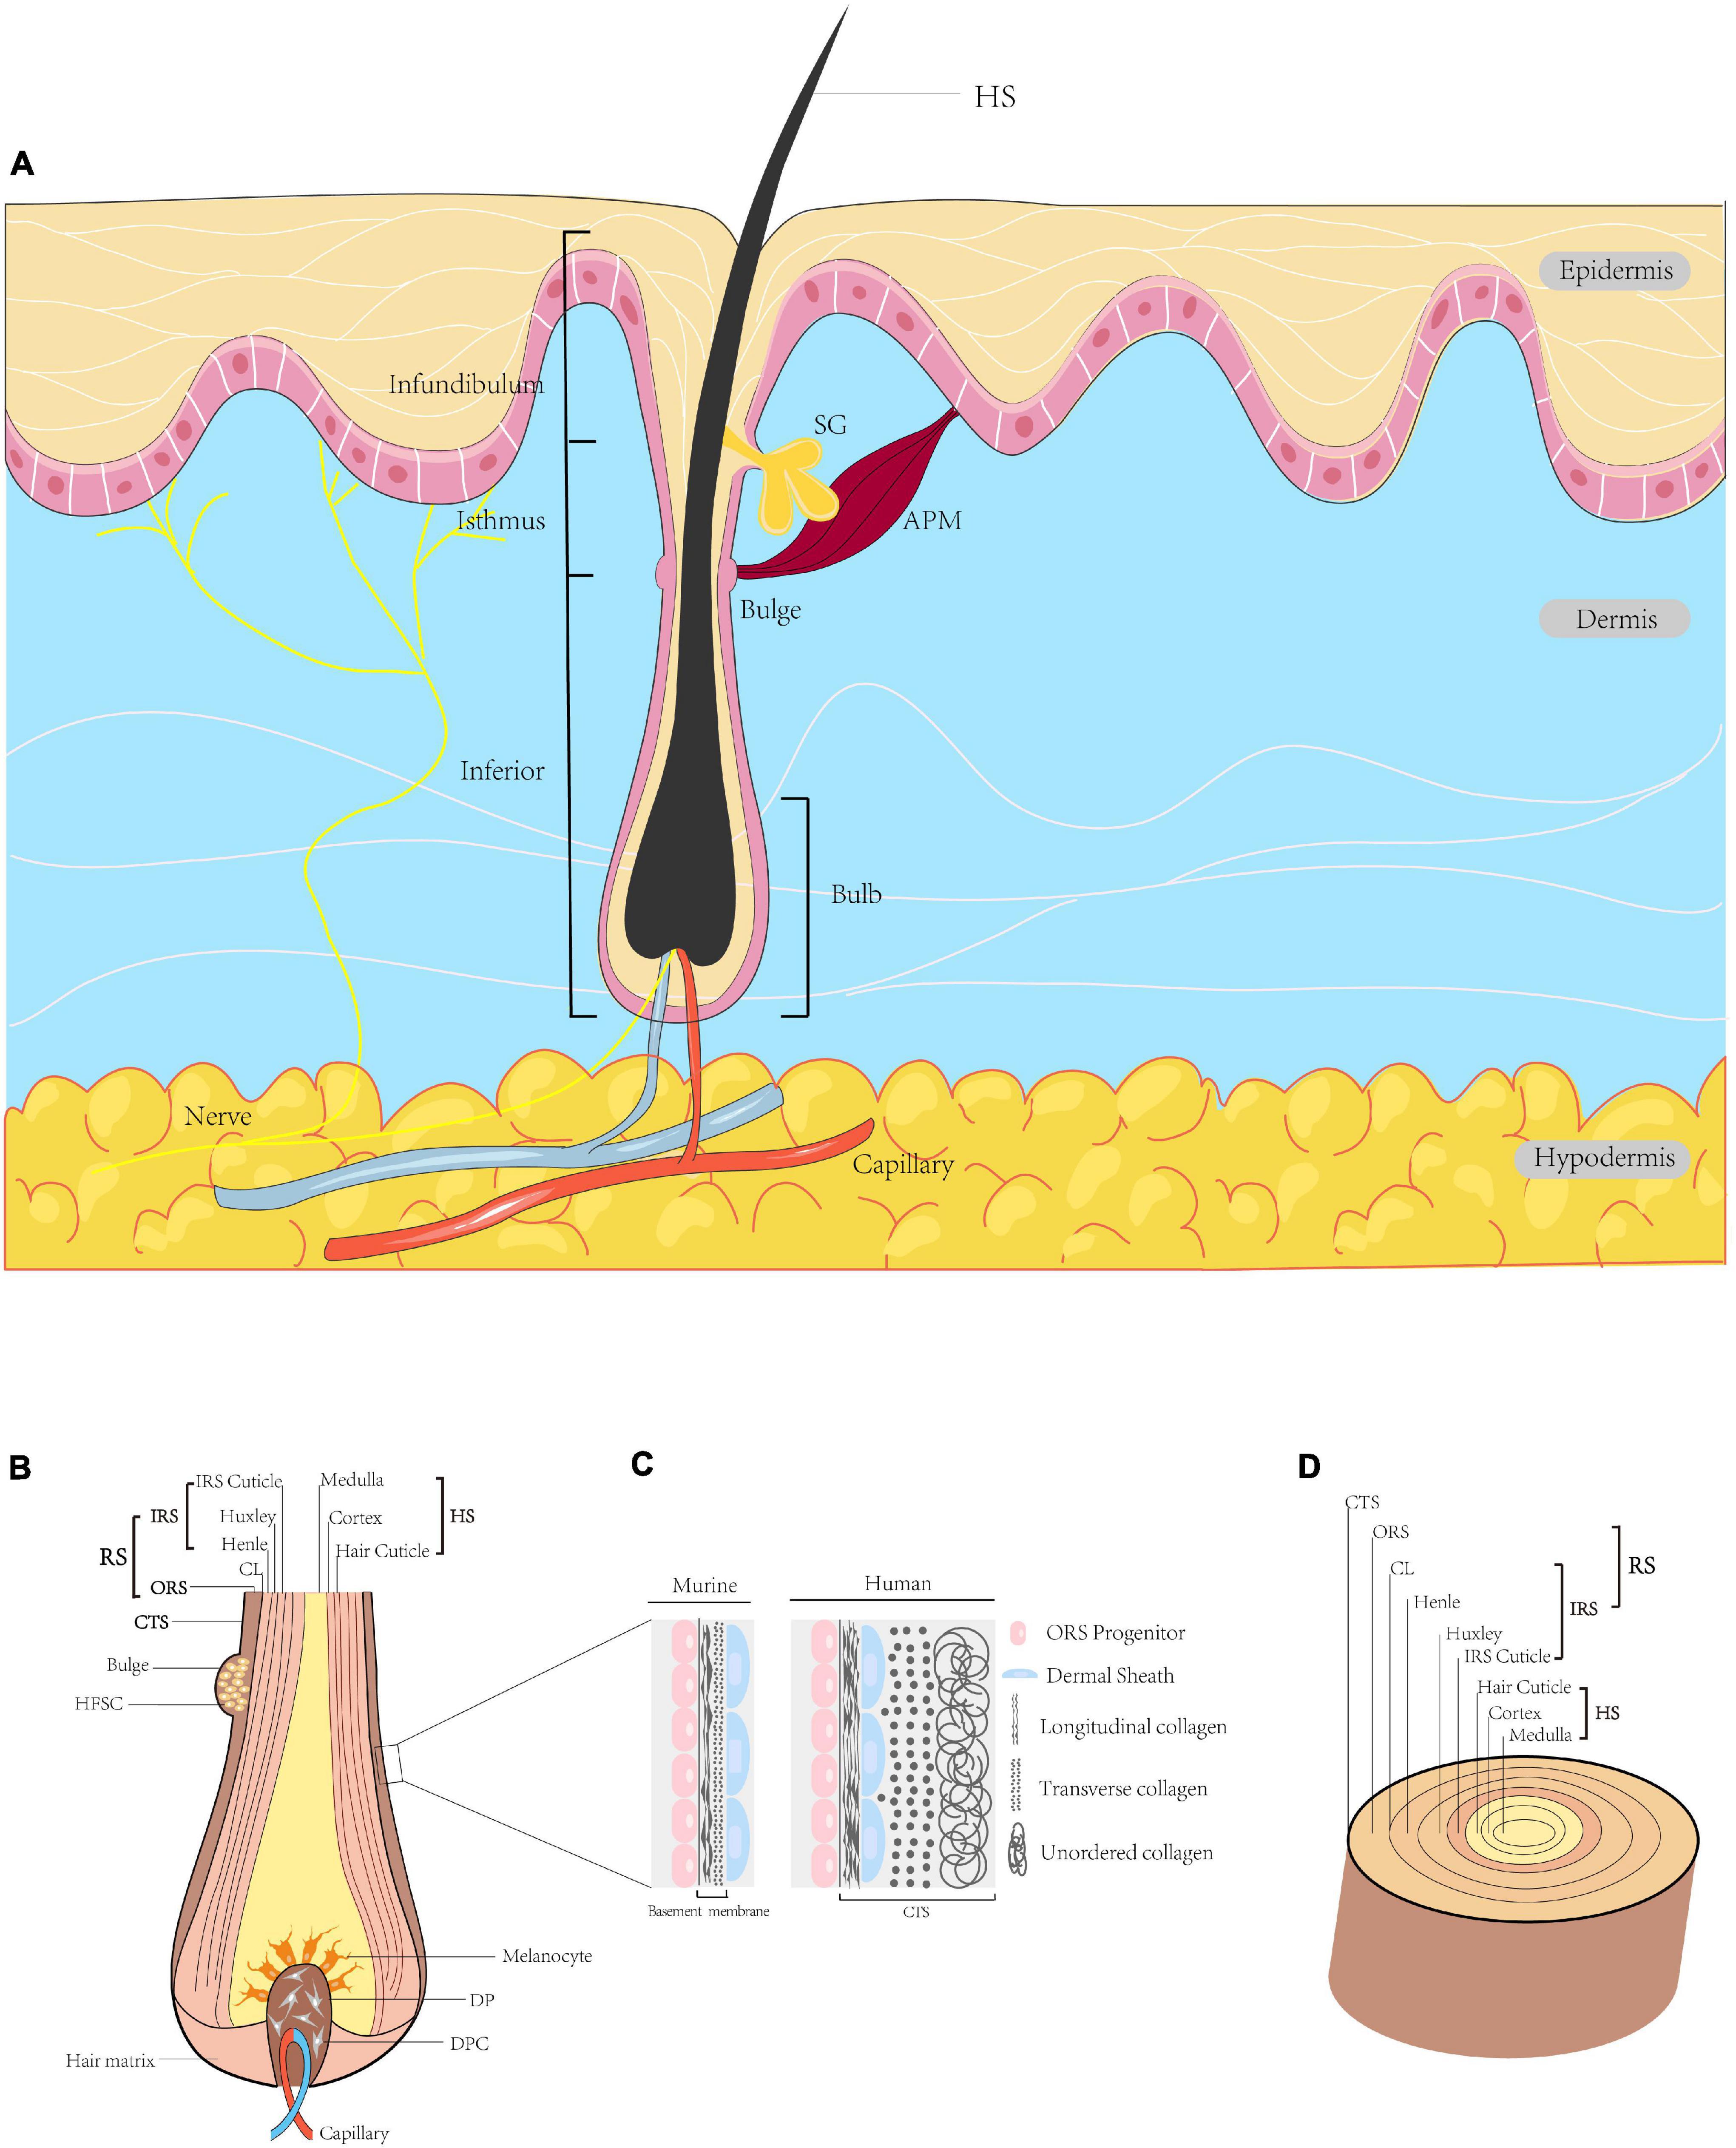 Nanodrug Delivery Strategies to Signaling Pathways in Alopecia